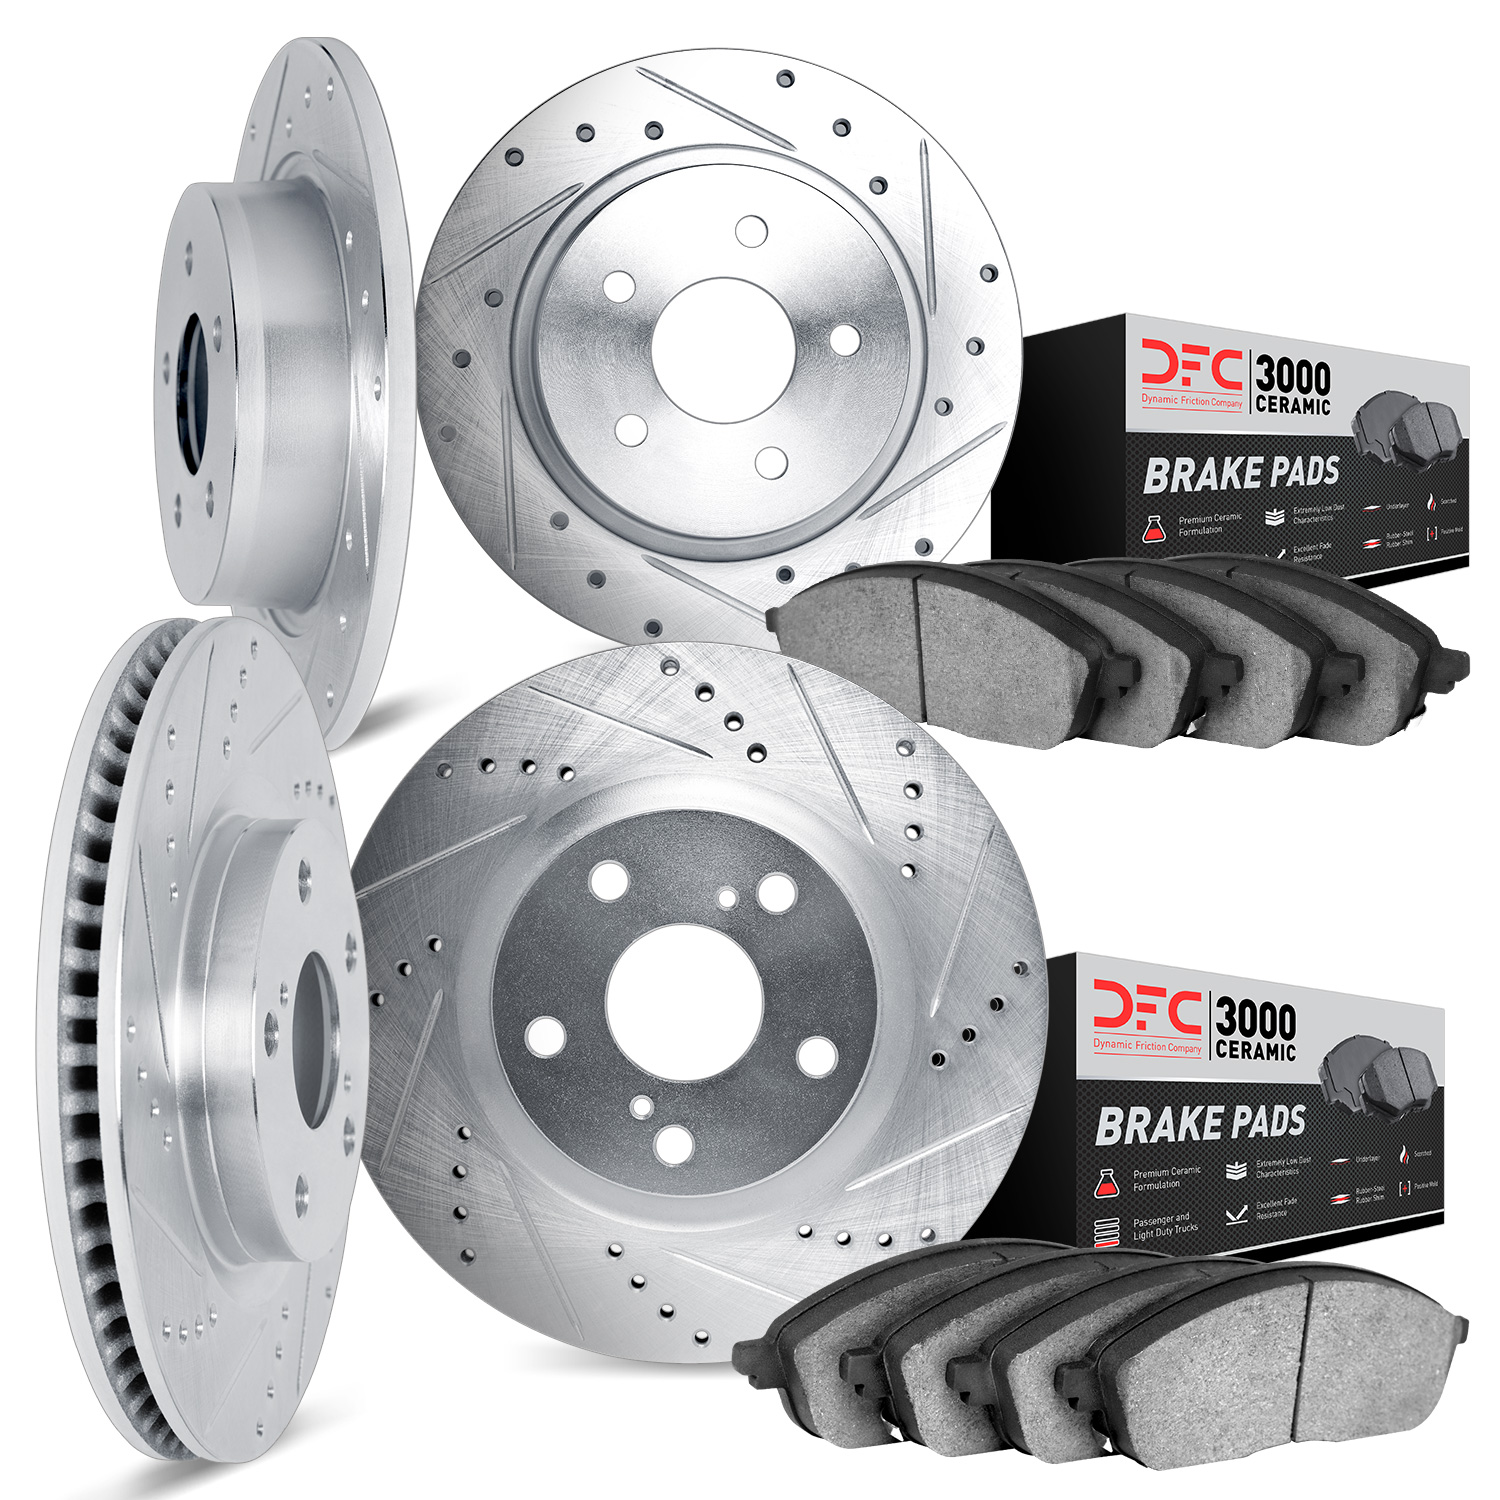 7304-54028 Drilled/Slotted Brake Rotor with 3000-Series Ceramic Brake Pads Kit [Silver], 1998-1999 Ford/Lincoln/Mercury/Mazda, P